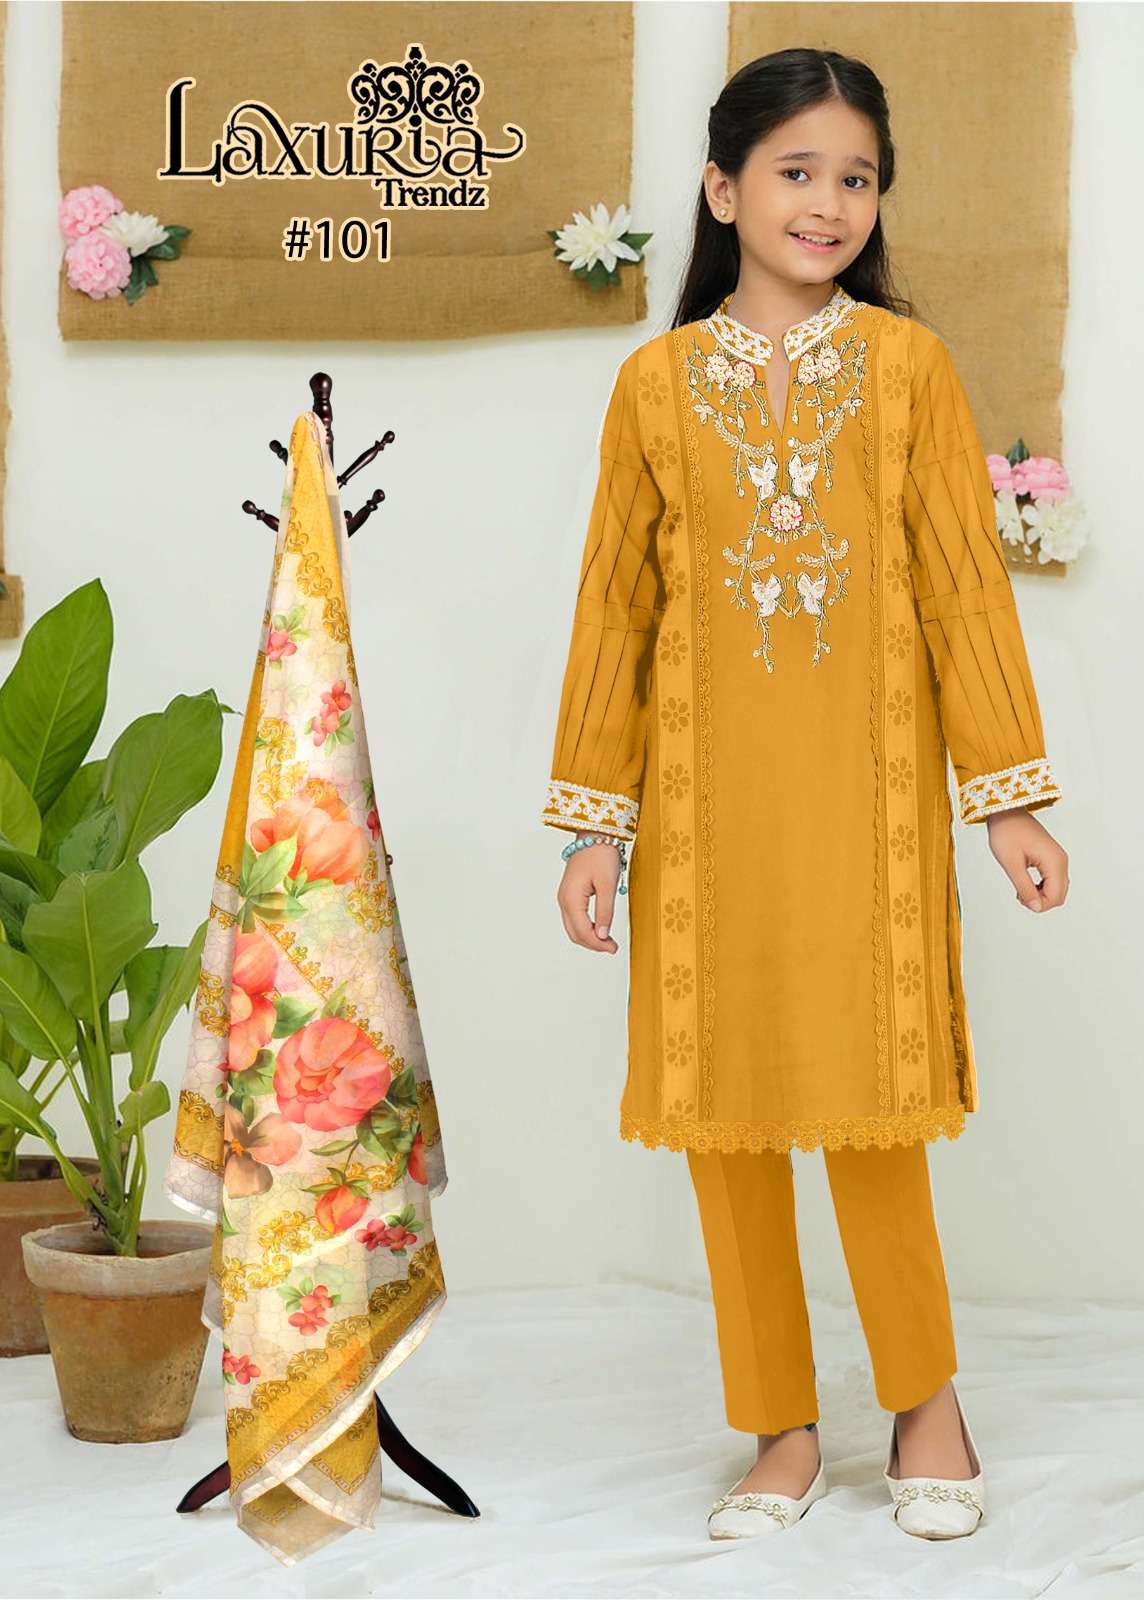  laxuria trendz now launching girls collection design number lt 101 10 to 15 years girls kids wear pakistani suit collection readymade pakistani suit for girls   